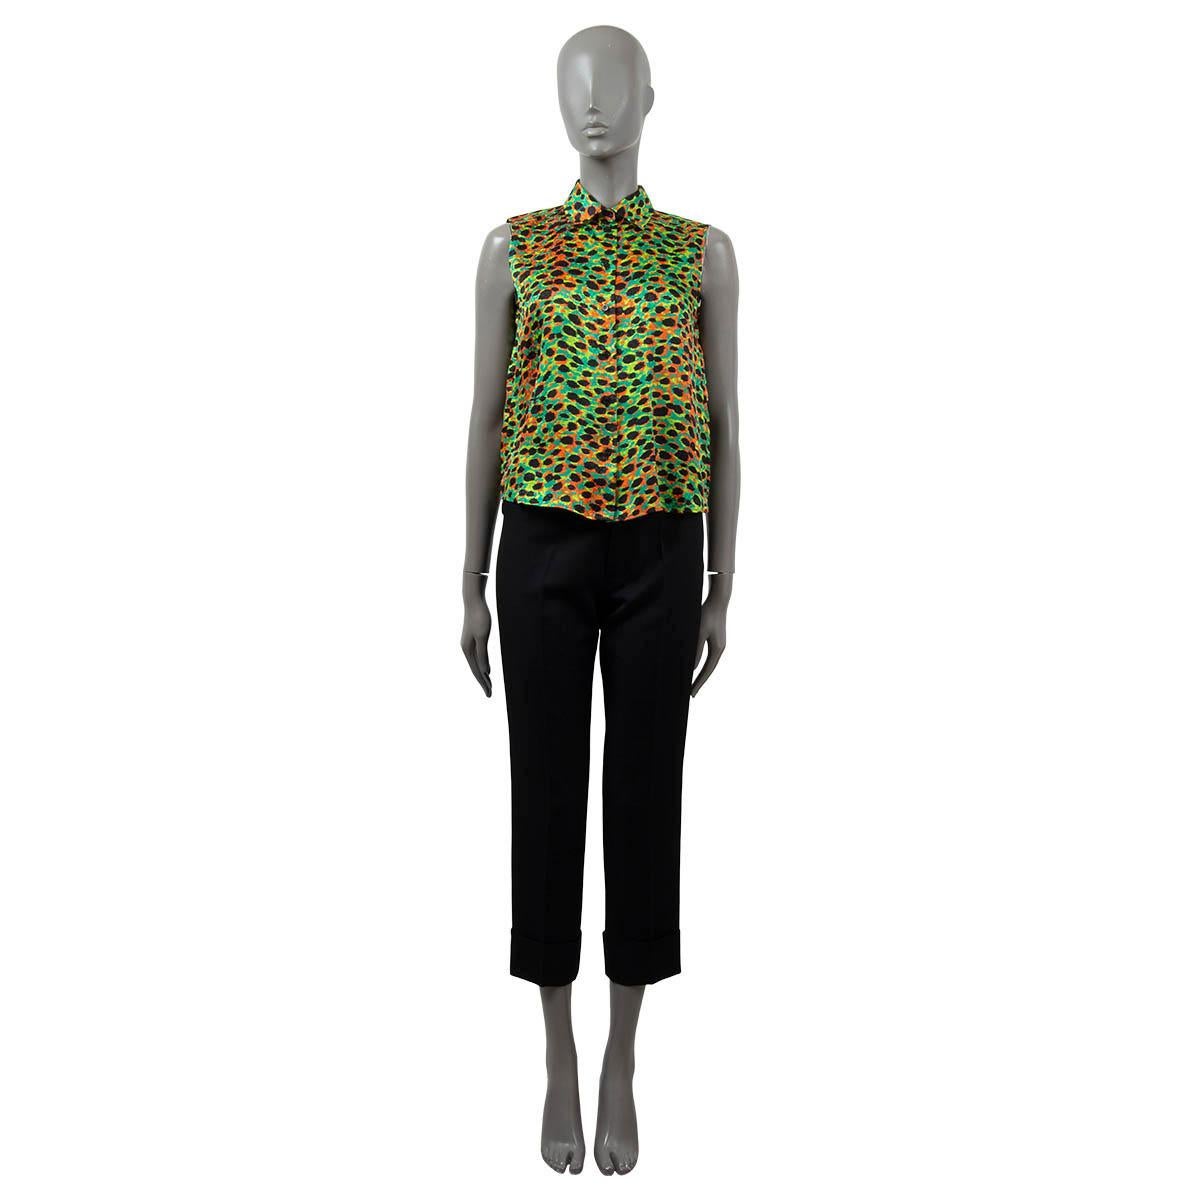 100% authentic Christian Dior oversized leopard print silk (100%) sleeveless blouse in green, orange, lime and black. Has been worn and is in excellent condition. 

2022 Spring/Summer

Measurements
Model	Dior22E
Tag Size	36
Size	XS
Shoulder